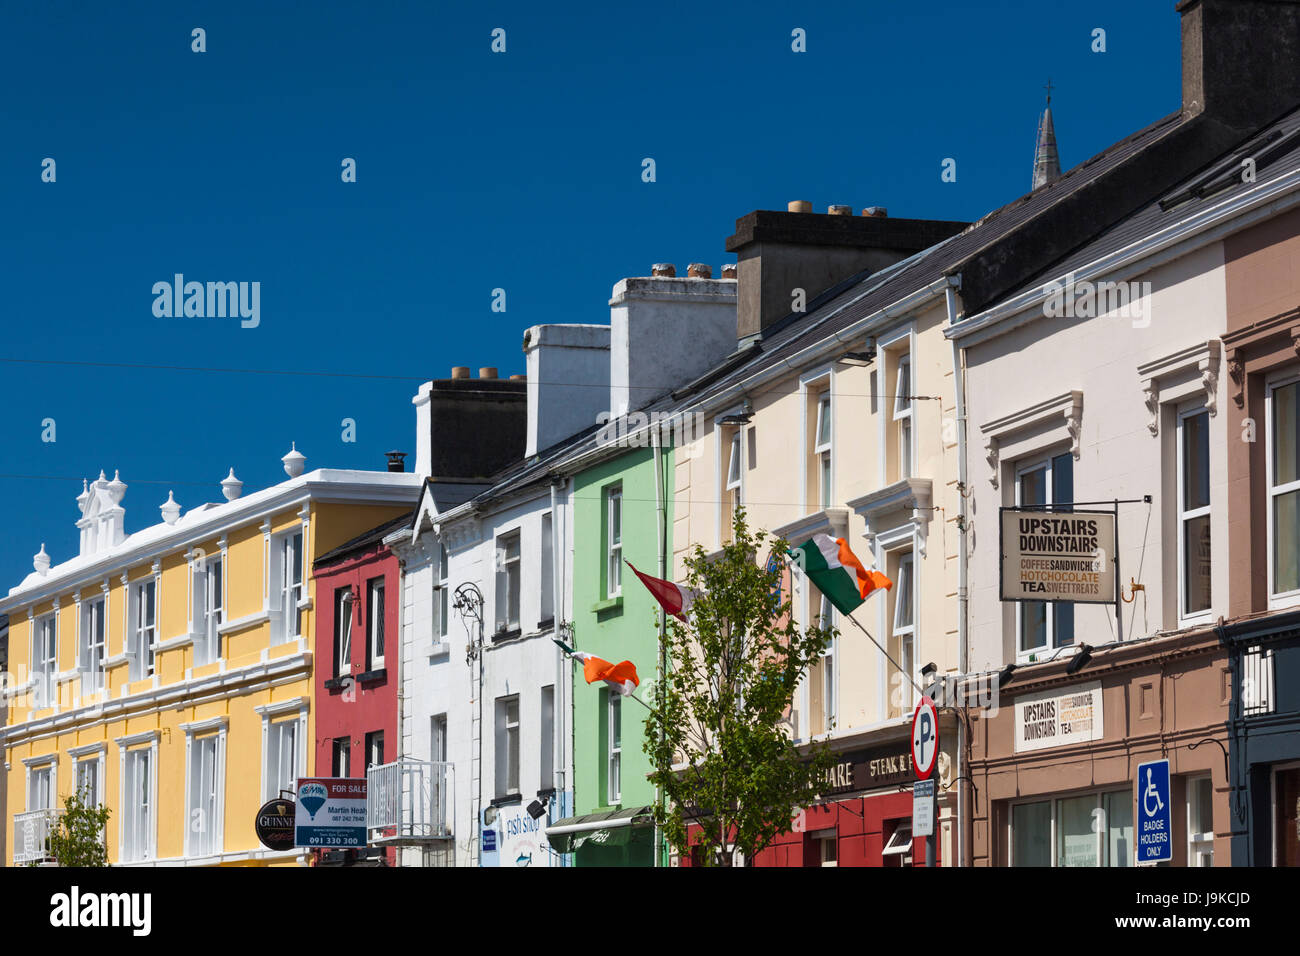 Ireland, County Galway, Clifden, town buildings Stock Photo